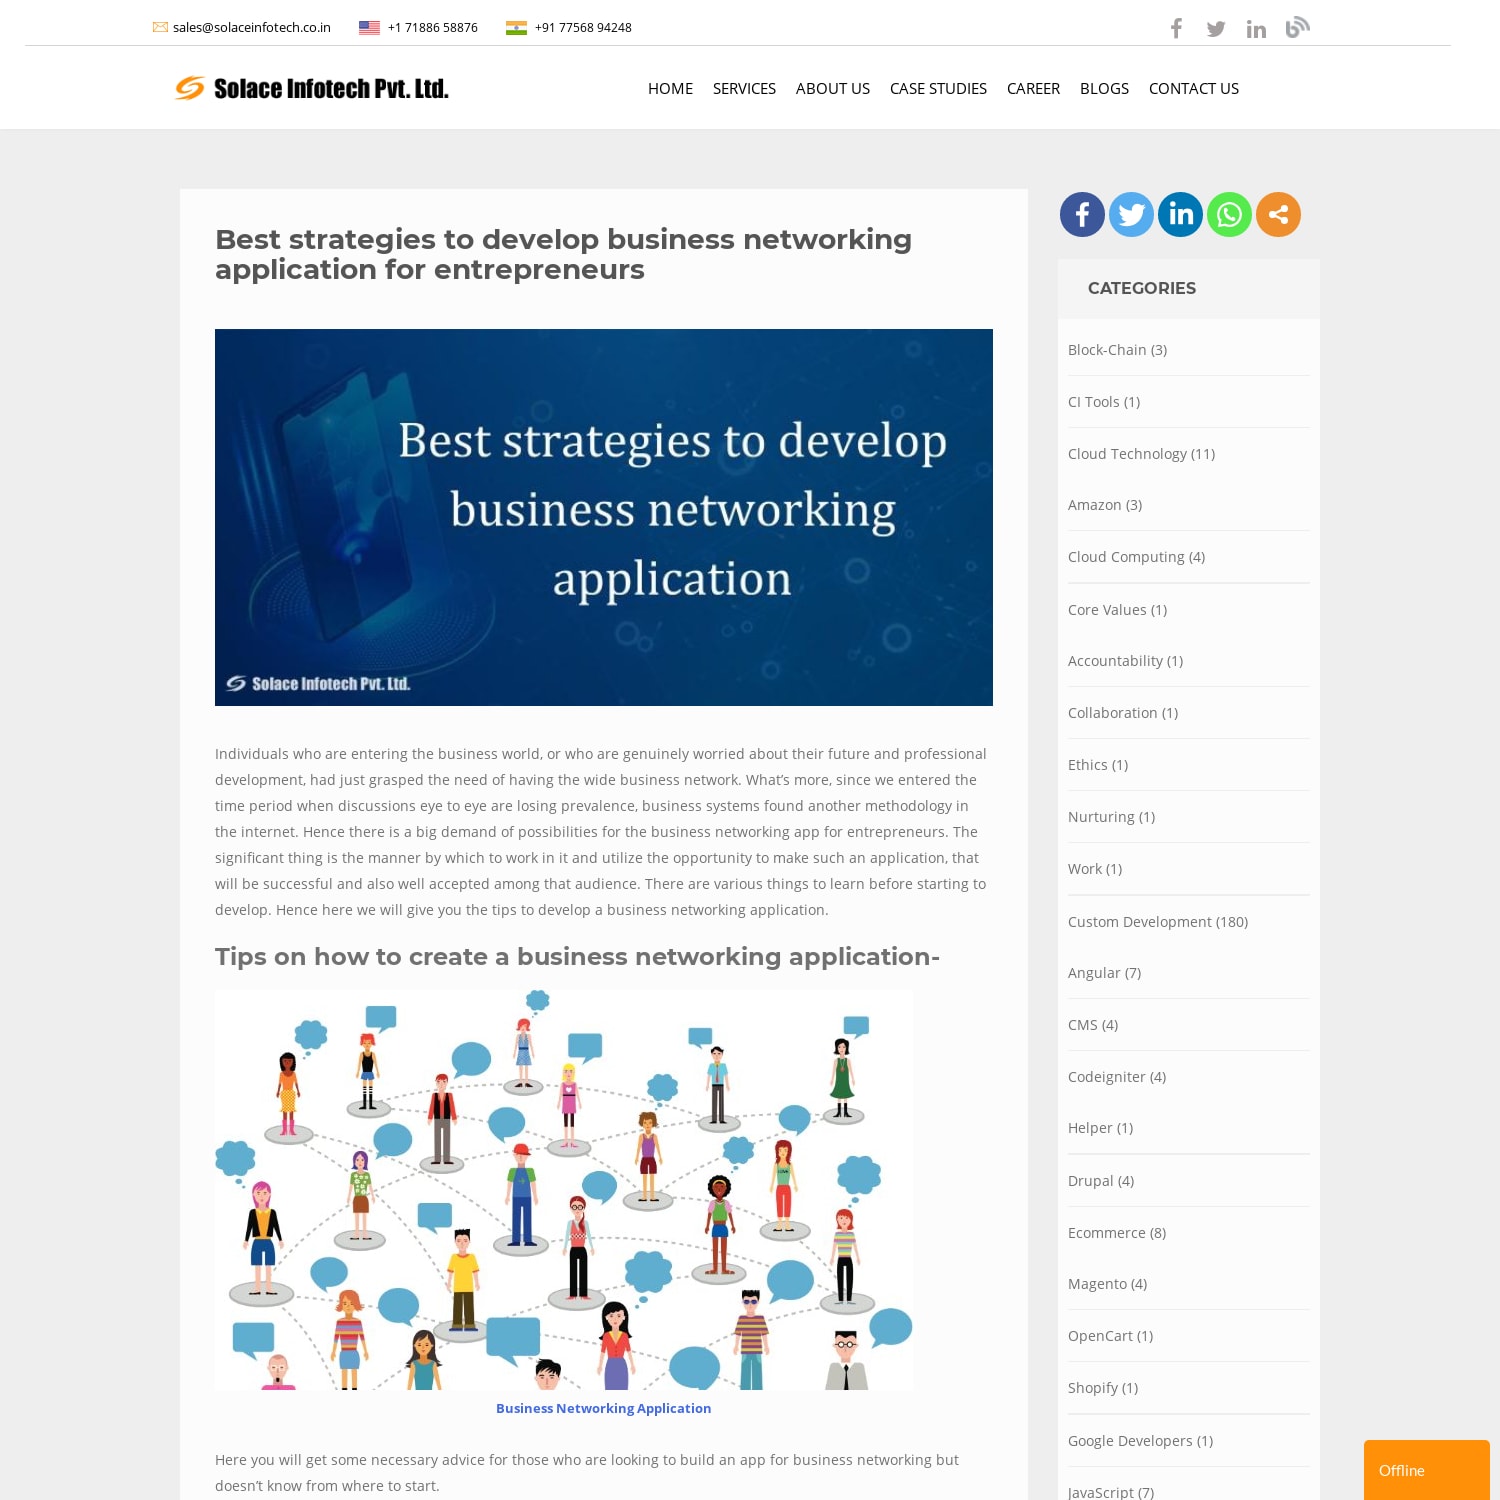 Best strategies to develop business networking application for entrepreneurs - Solace Infotech Pvt Ltd